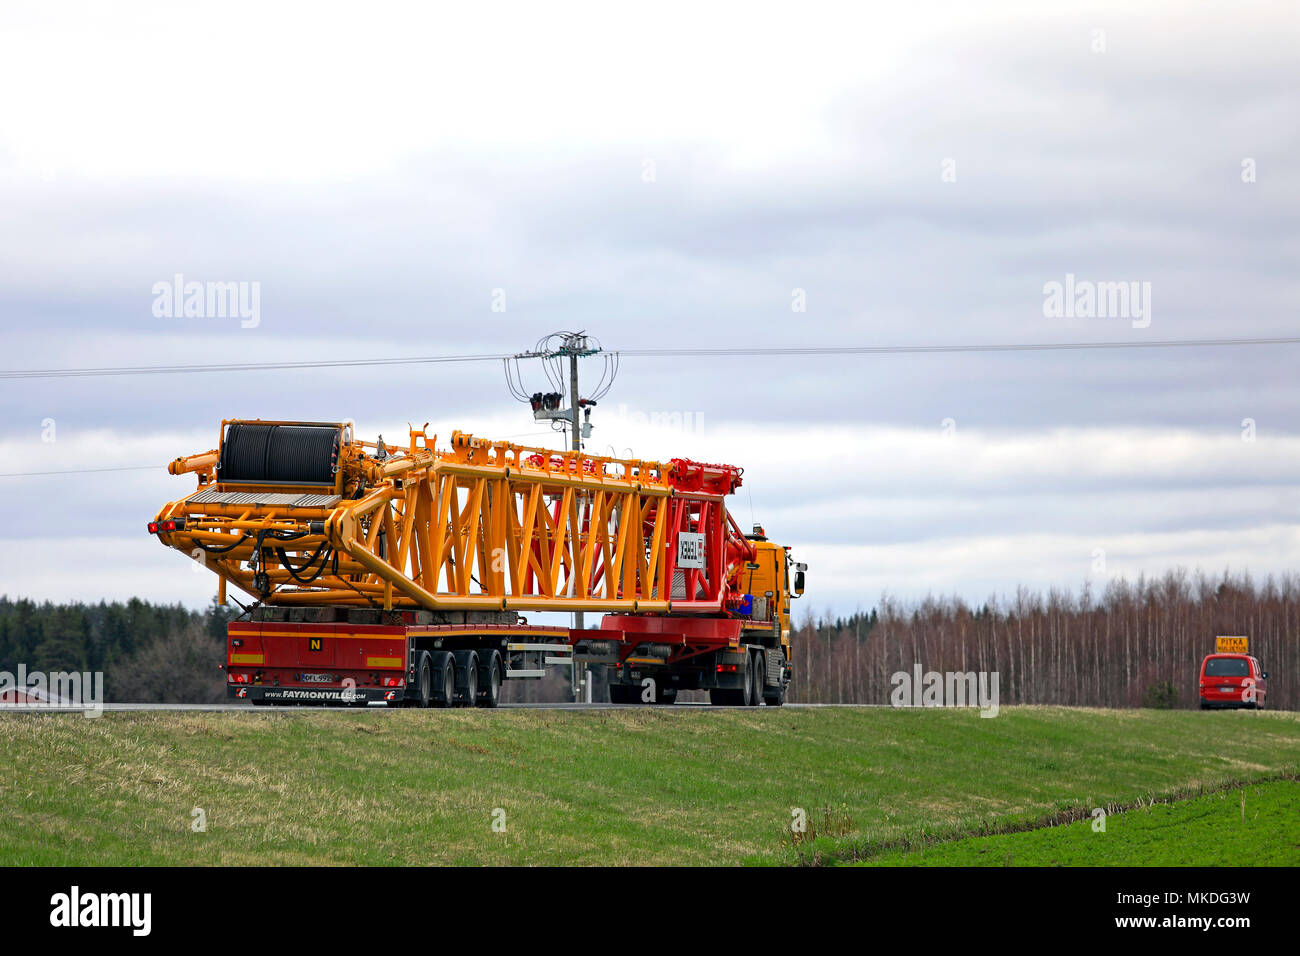 45 metres long oversize transport of Terex lifting equipment on the road. The load requires a pilot car in front of and behind of the long vehicle. Hu Stock Photo